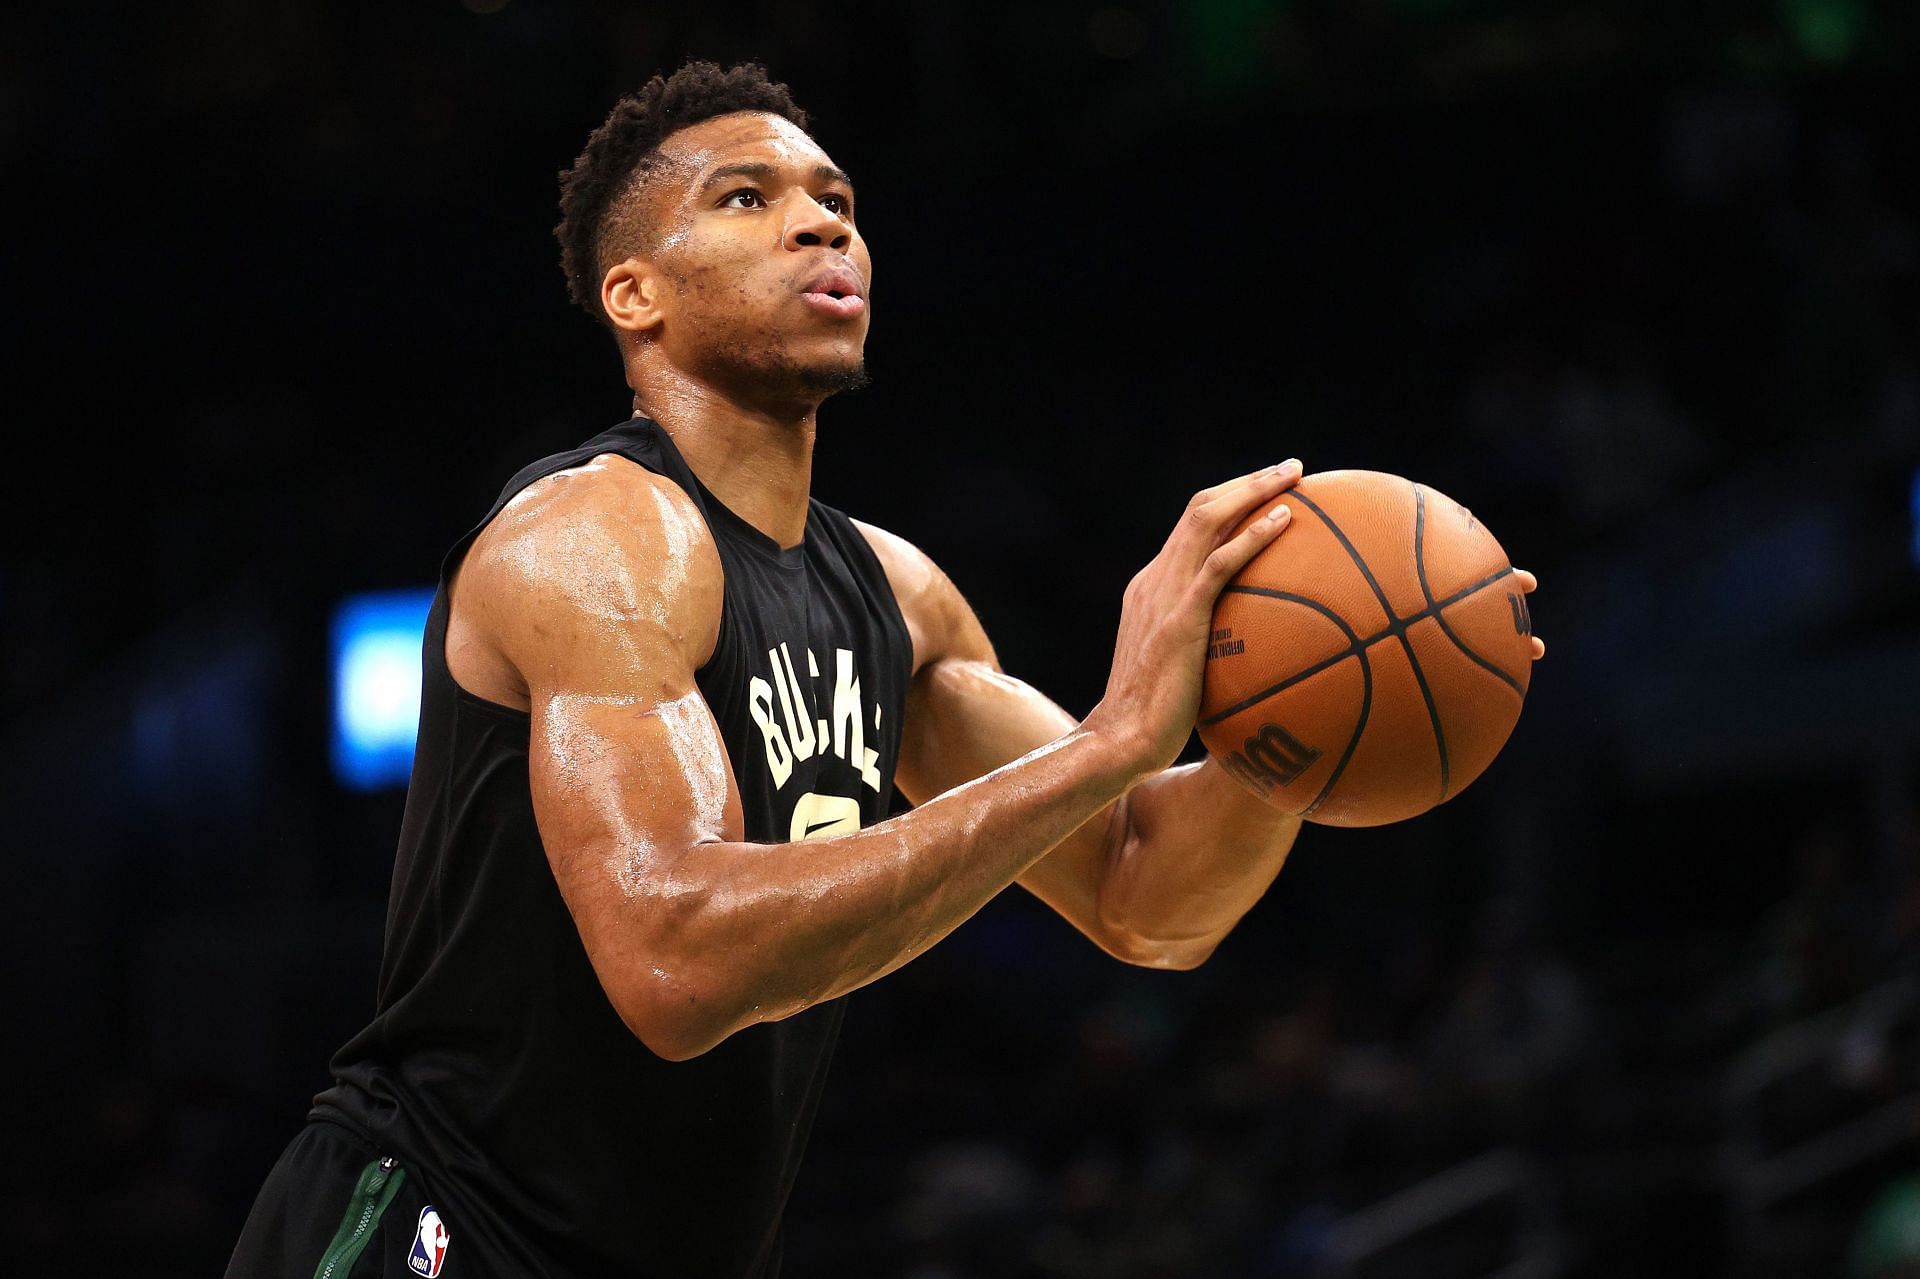 Giannis Antetokounmpo warms up ahead of a game